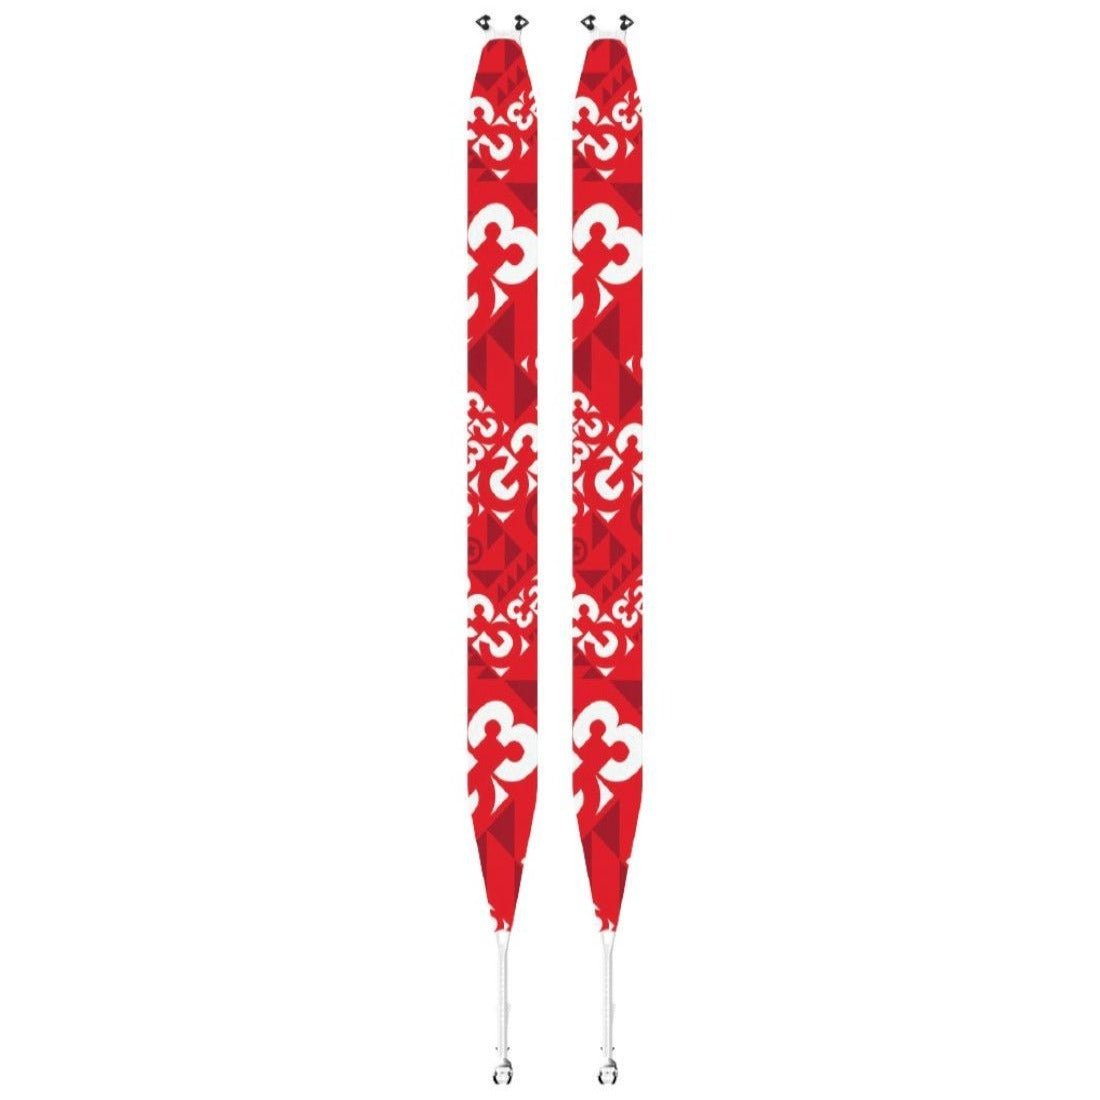 ELEMENTS UNIVERSAL Climbing Skins - Skins - G3 Store [CAD]